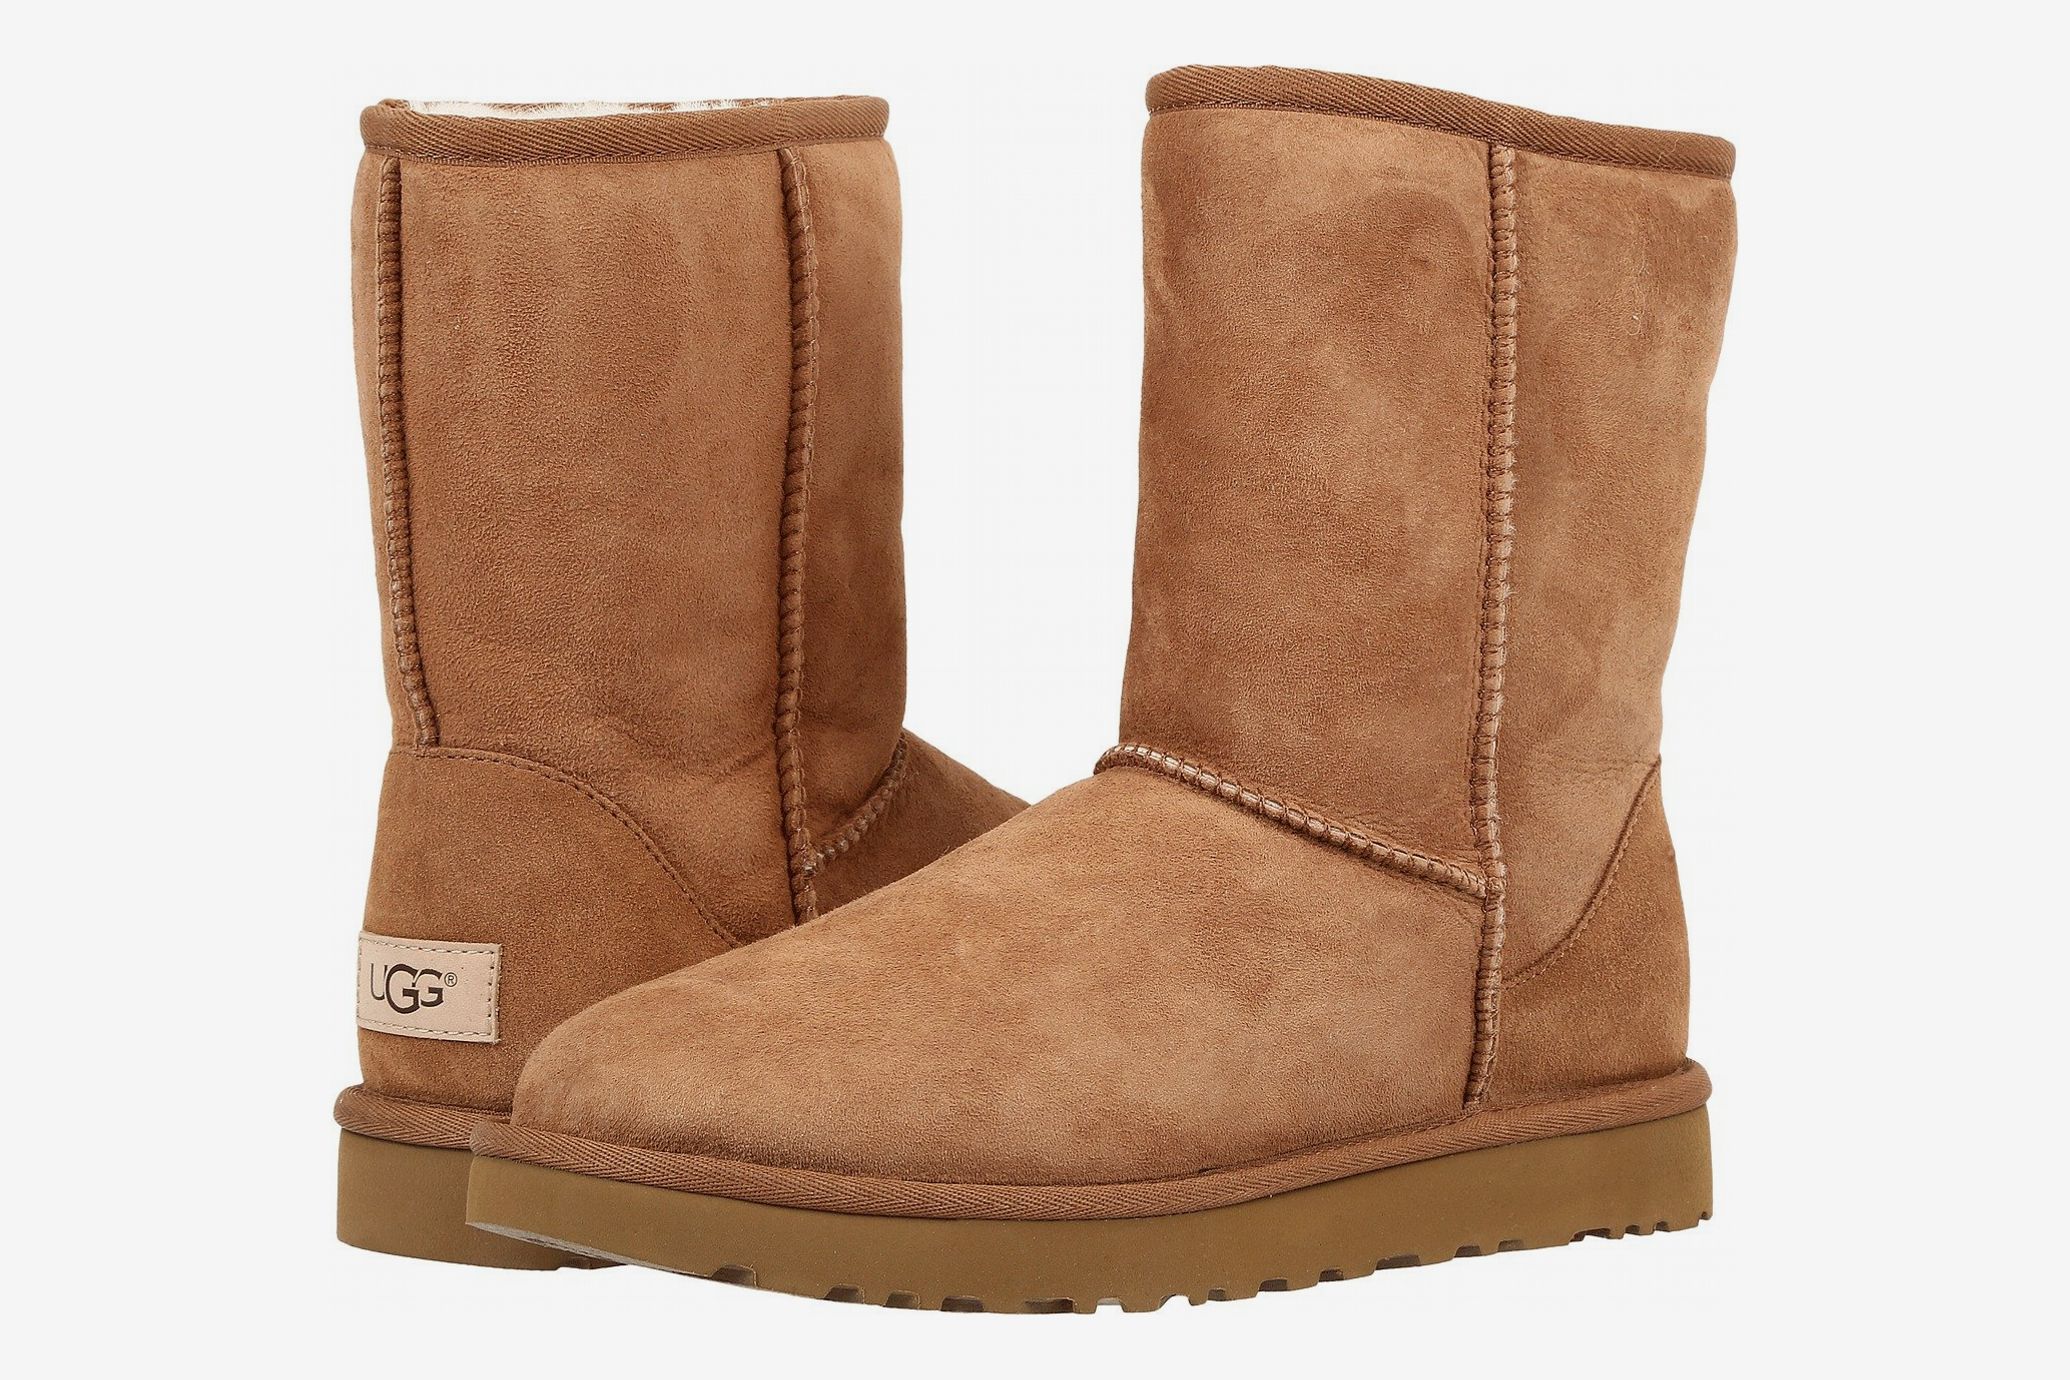 The Best Winter Boots 2023: L.L. Bean, Sorel, Moon Boot, Ugg – The